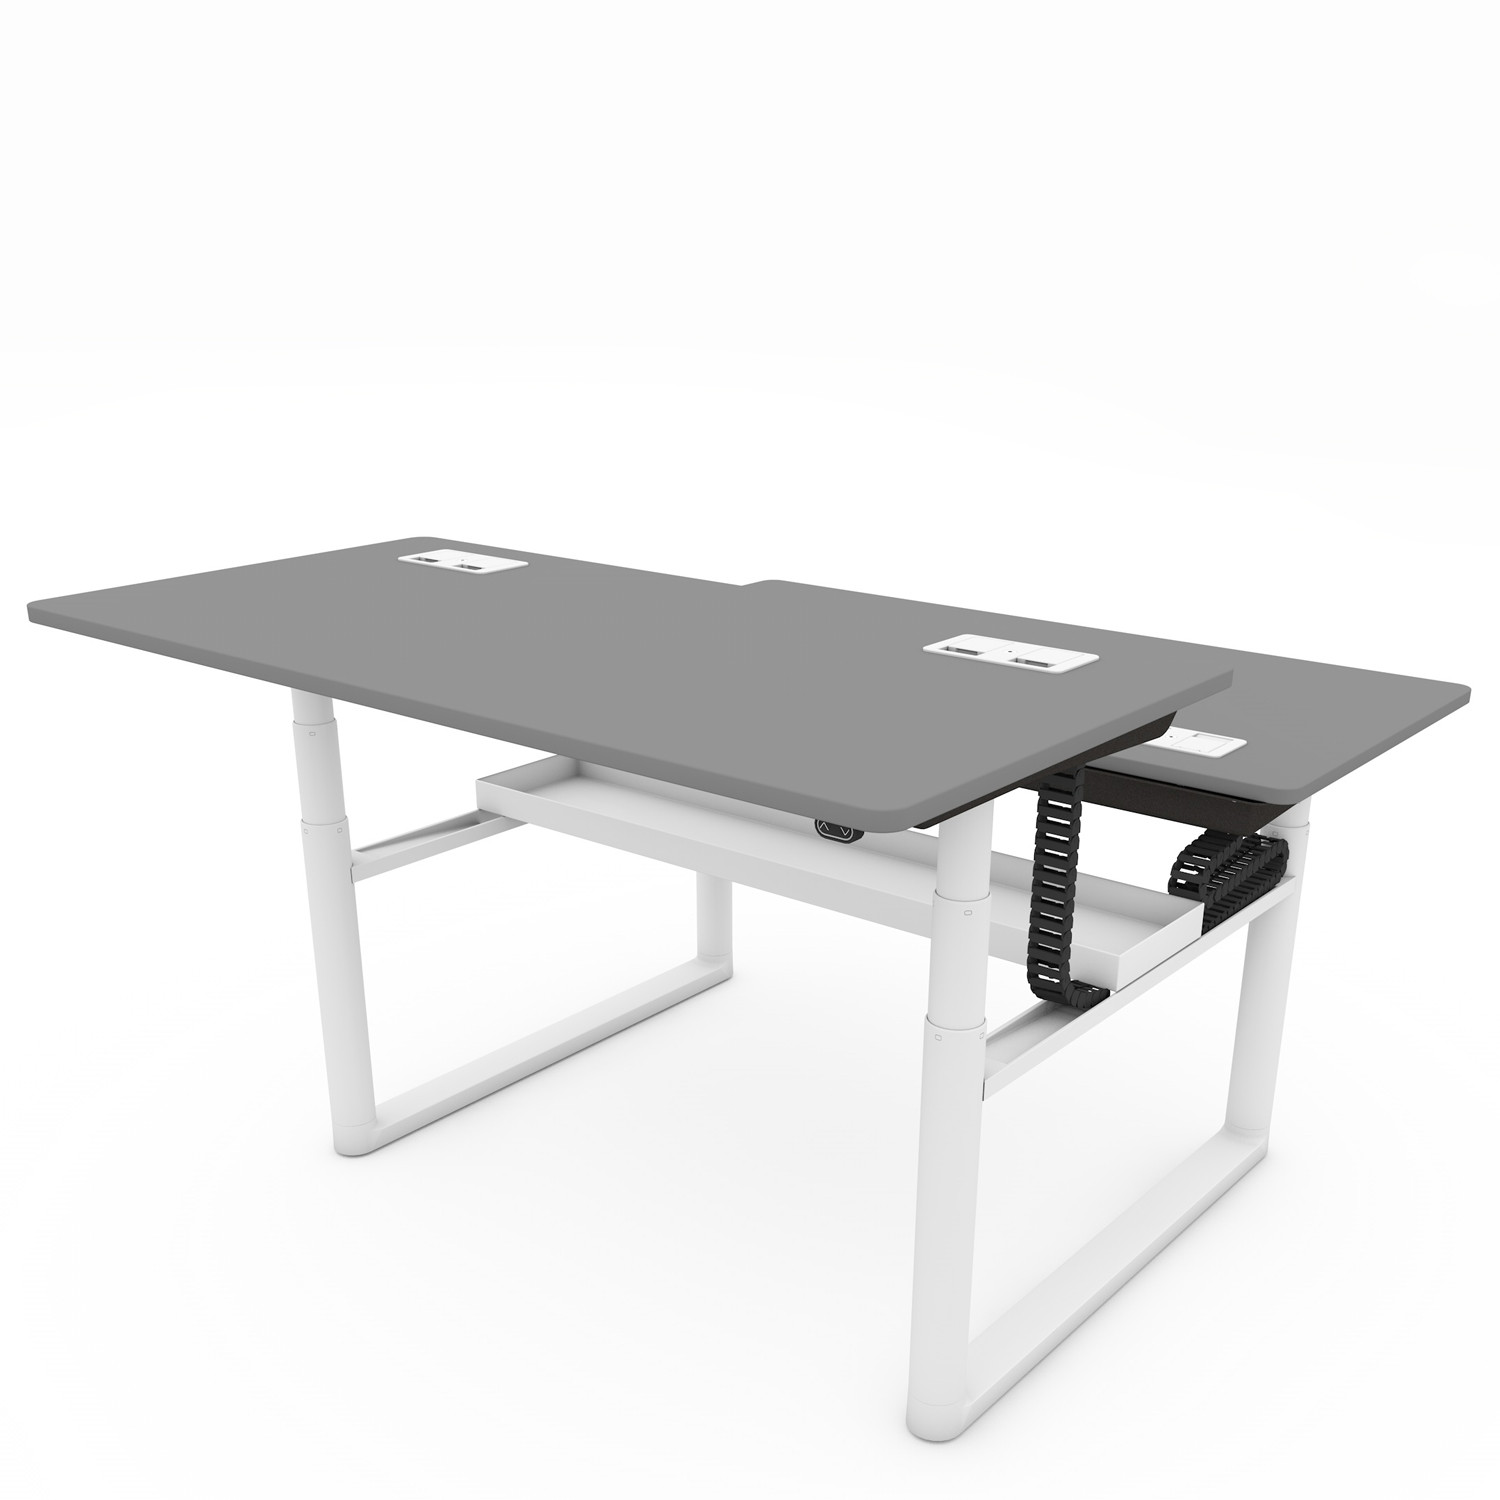 Tyde Sit-stand double bench desk